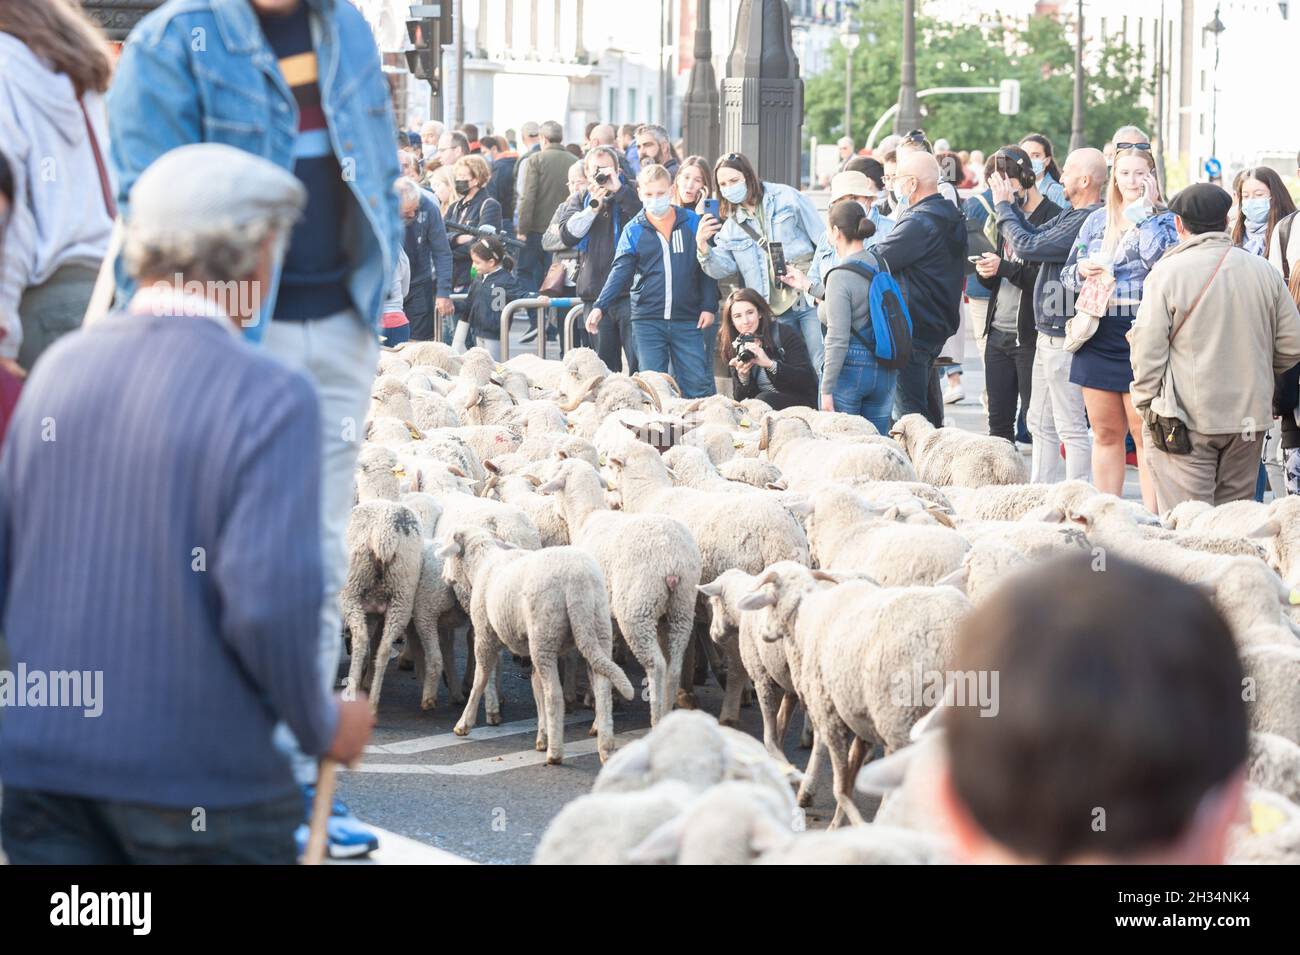 Madrid, Spain; October 24, 2021: Vindication of Transhumance in the center of Madrid. Sheep and goats walking through the streets of downtown madrid l Stock Photo